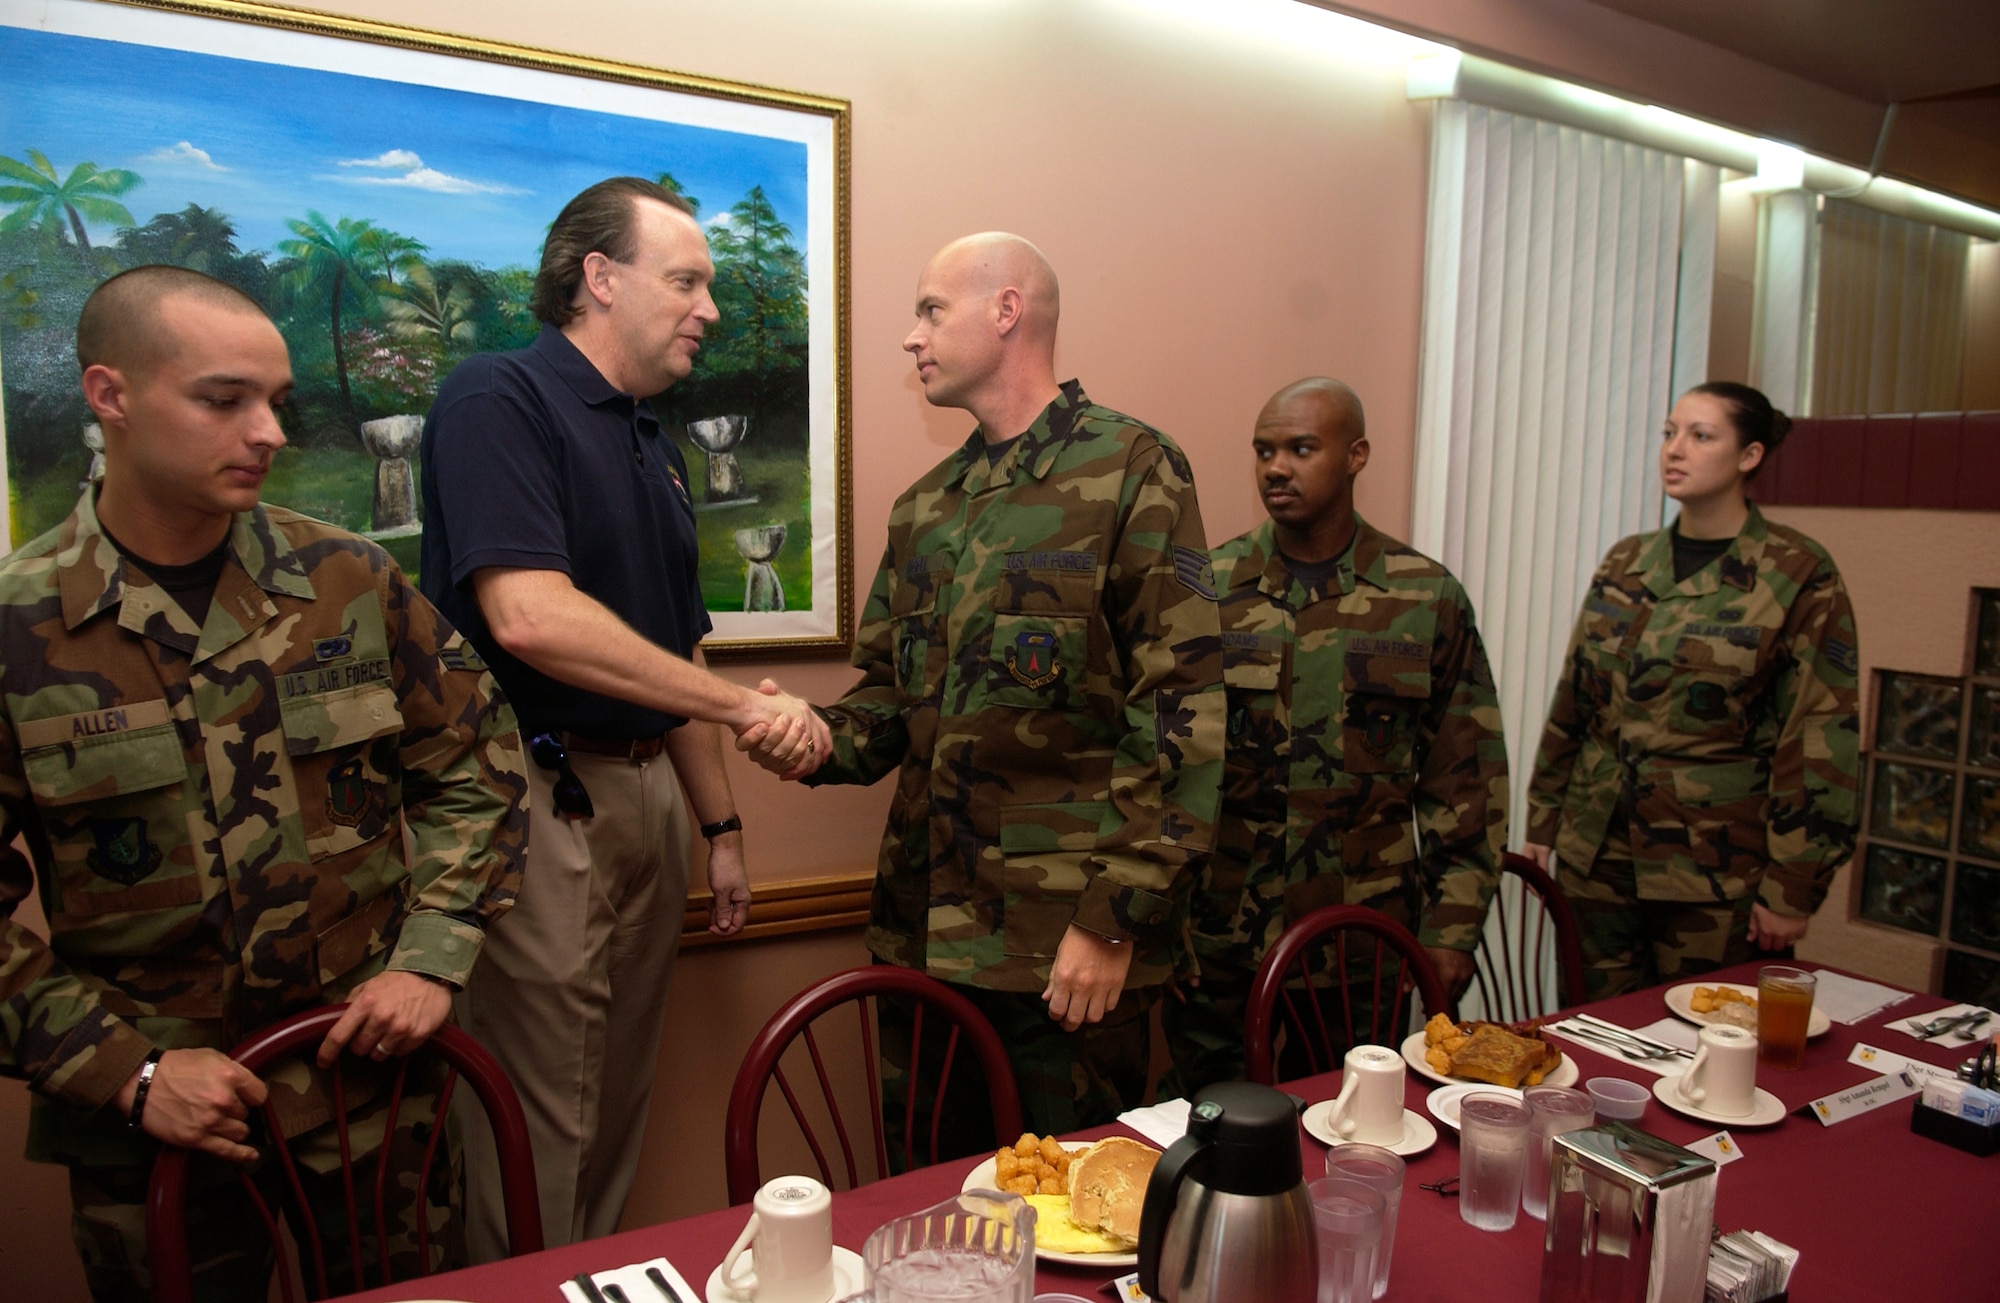 William C. Anderson shares breakfast with several Airmen Jan. 20 during his visit to Andersen Air Force Base, Guam. As assistant secretary of the Air Force, Mr. Anderson heads three division departments that deal at the policy level with Air Force facility and logistical issues. The department's responsibilities include installations, military construction, base closure and realignment; environment, safety and occupational health issues; and all logistical matters. (U.S. Air Force photo/Senior Airman Miranda Moorer)